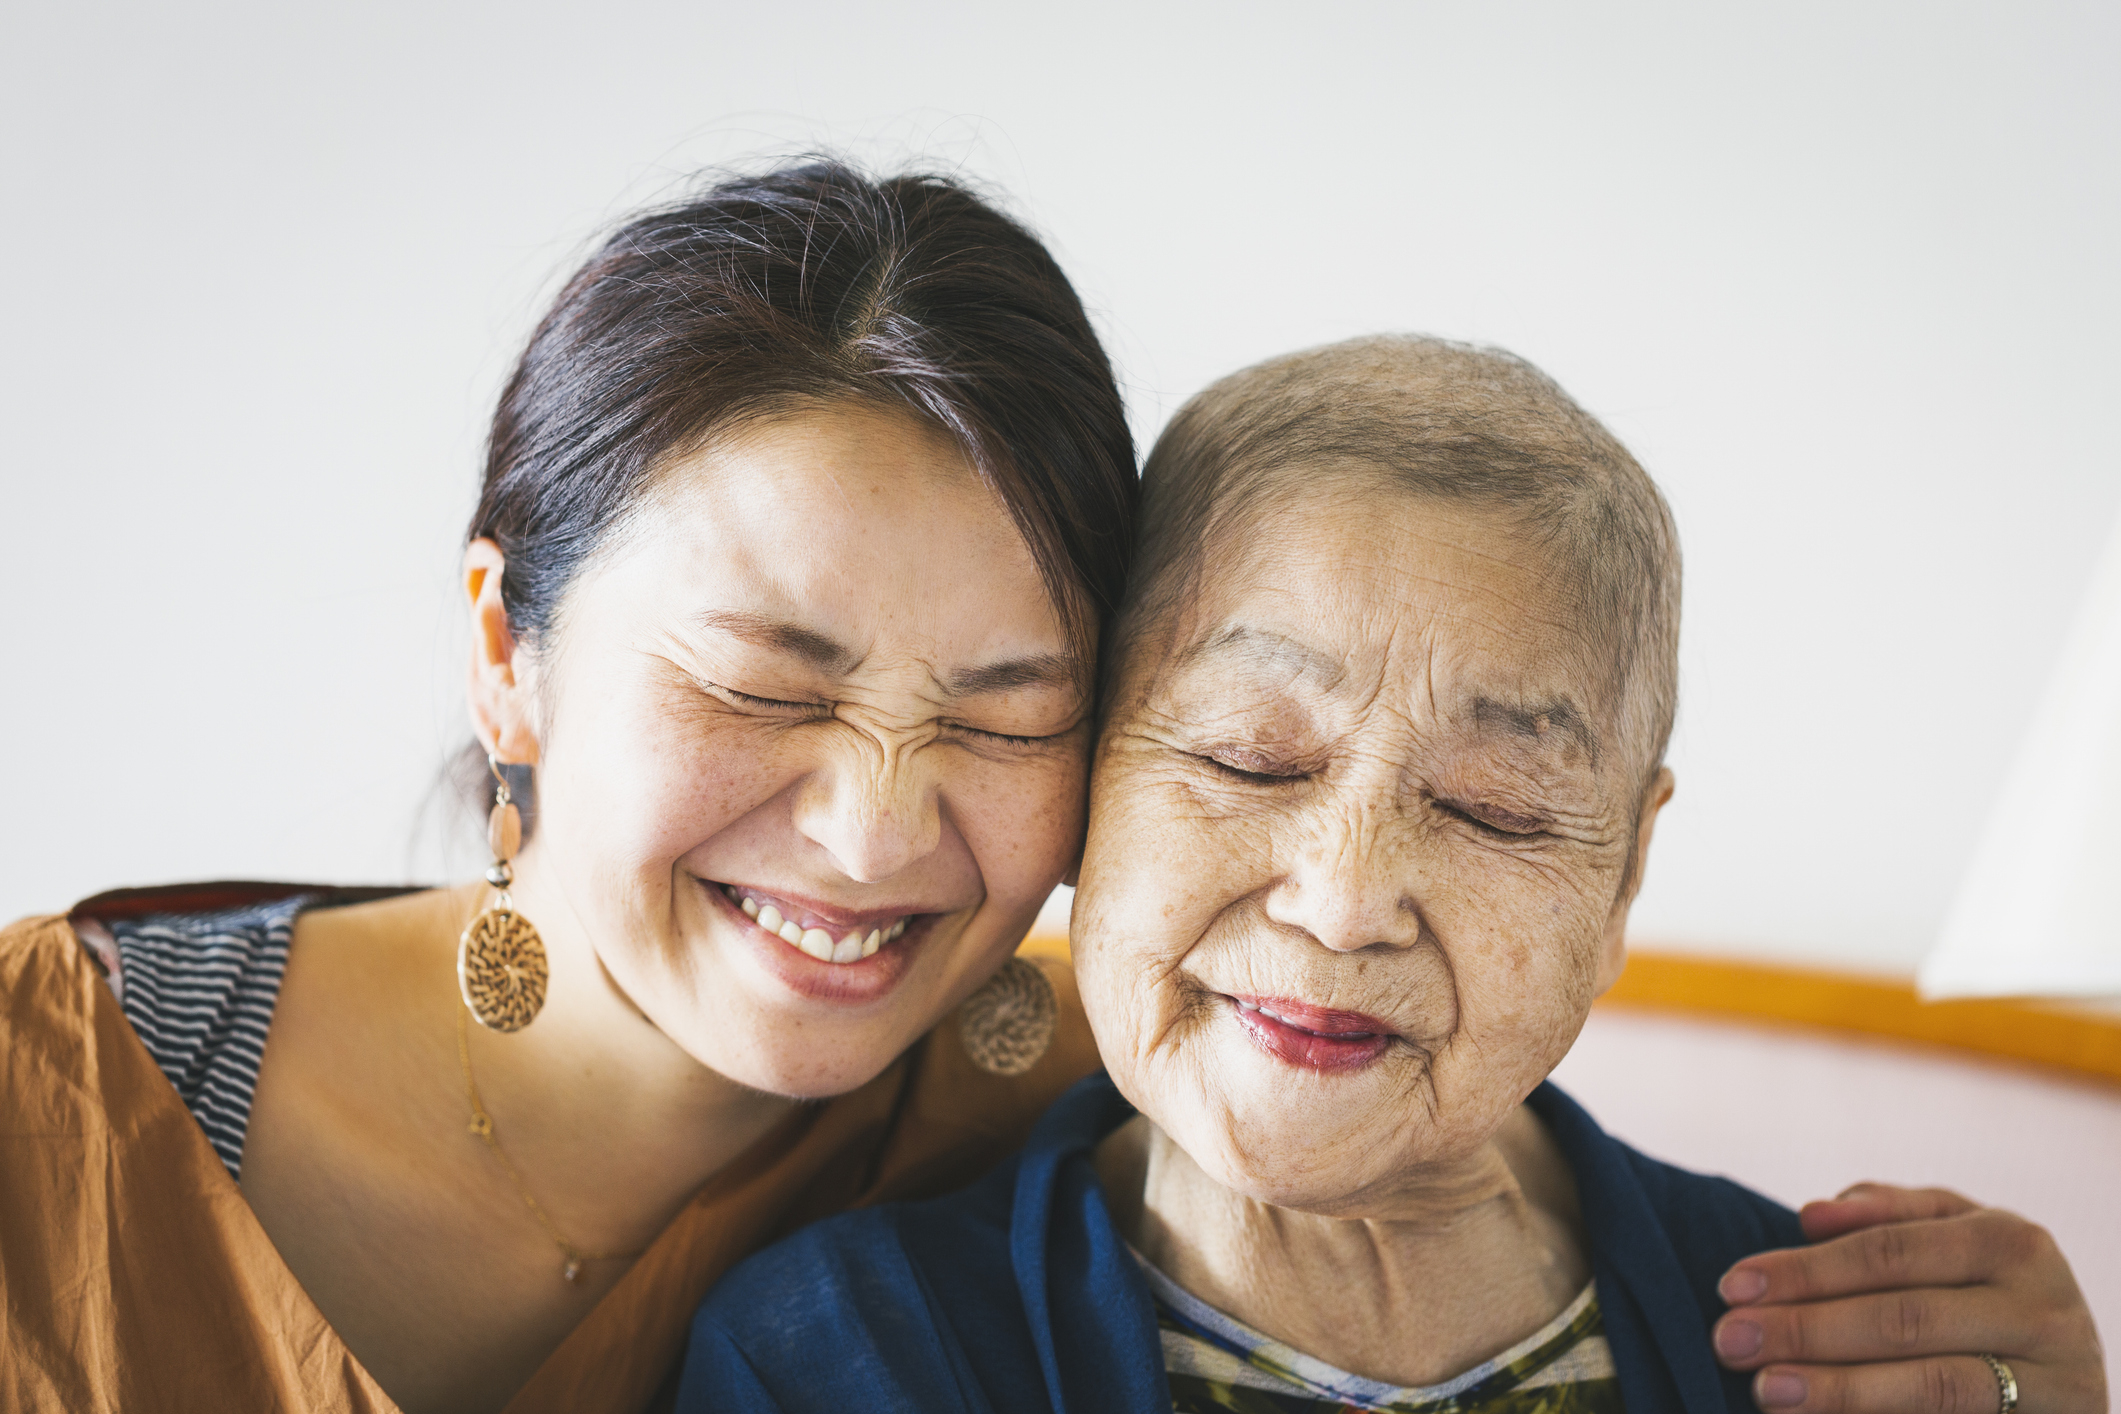 Two women embrace and smile warmly, eyes closed, radiating happiness and affection